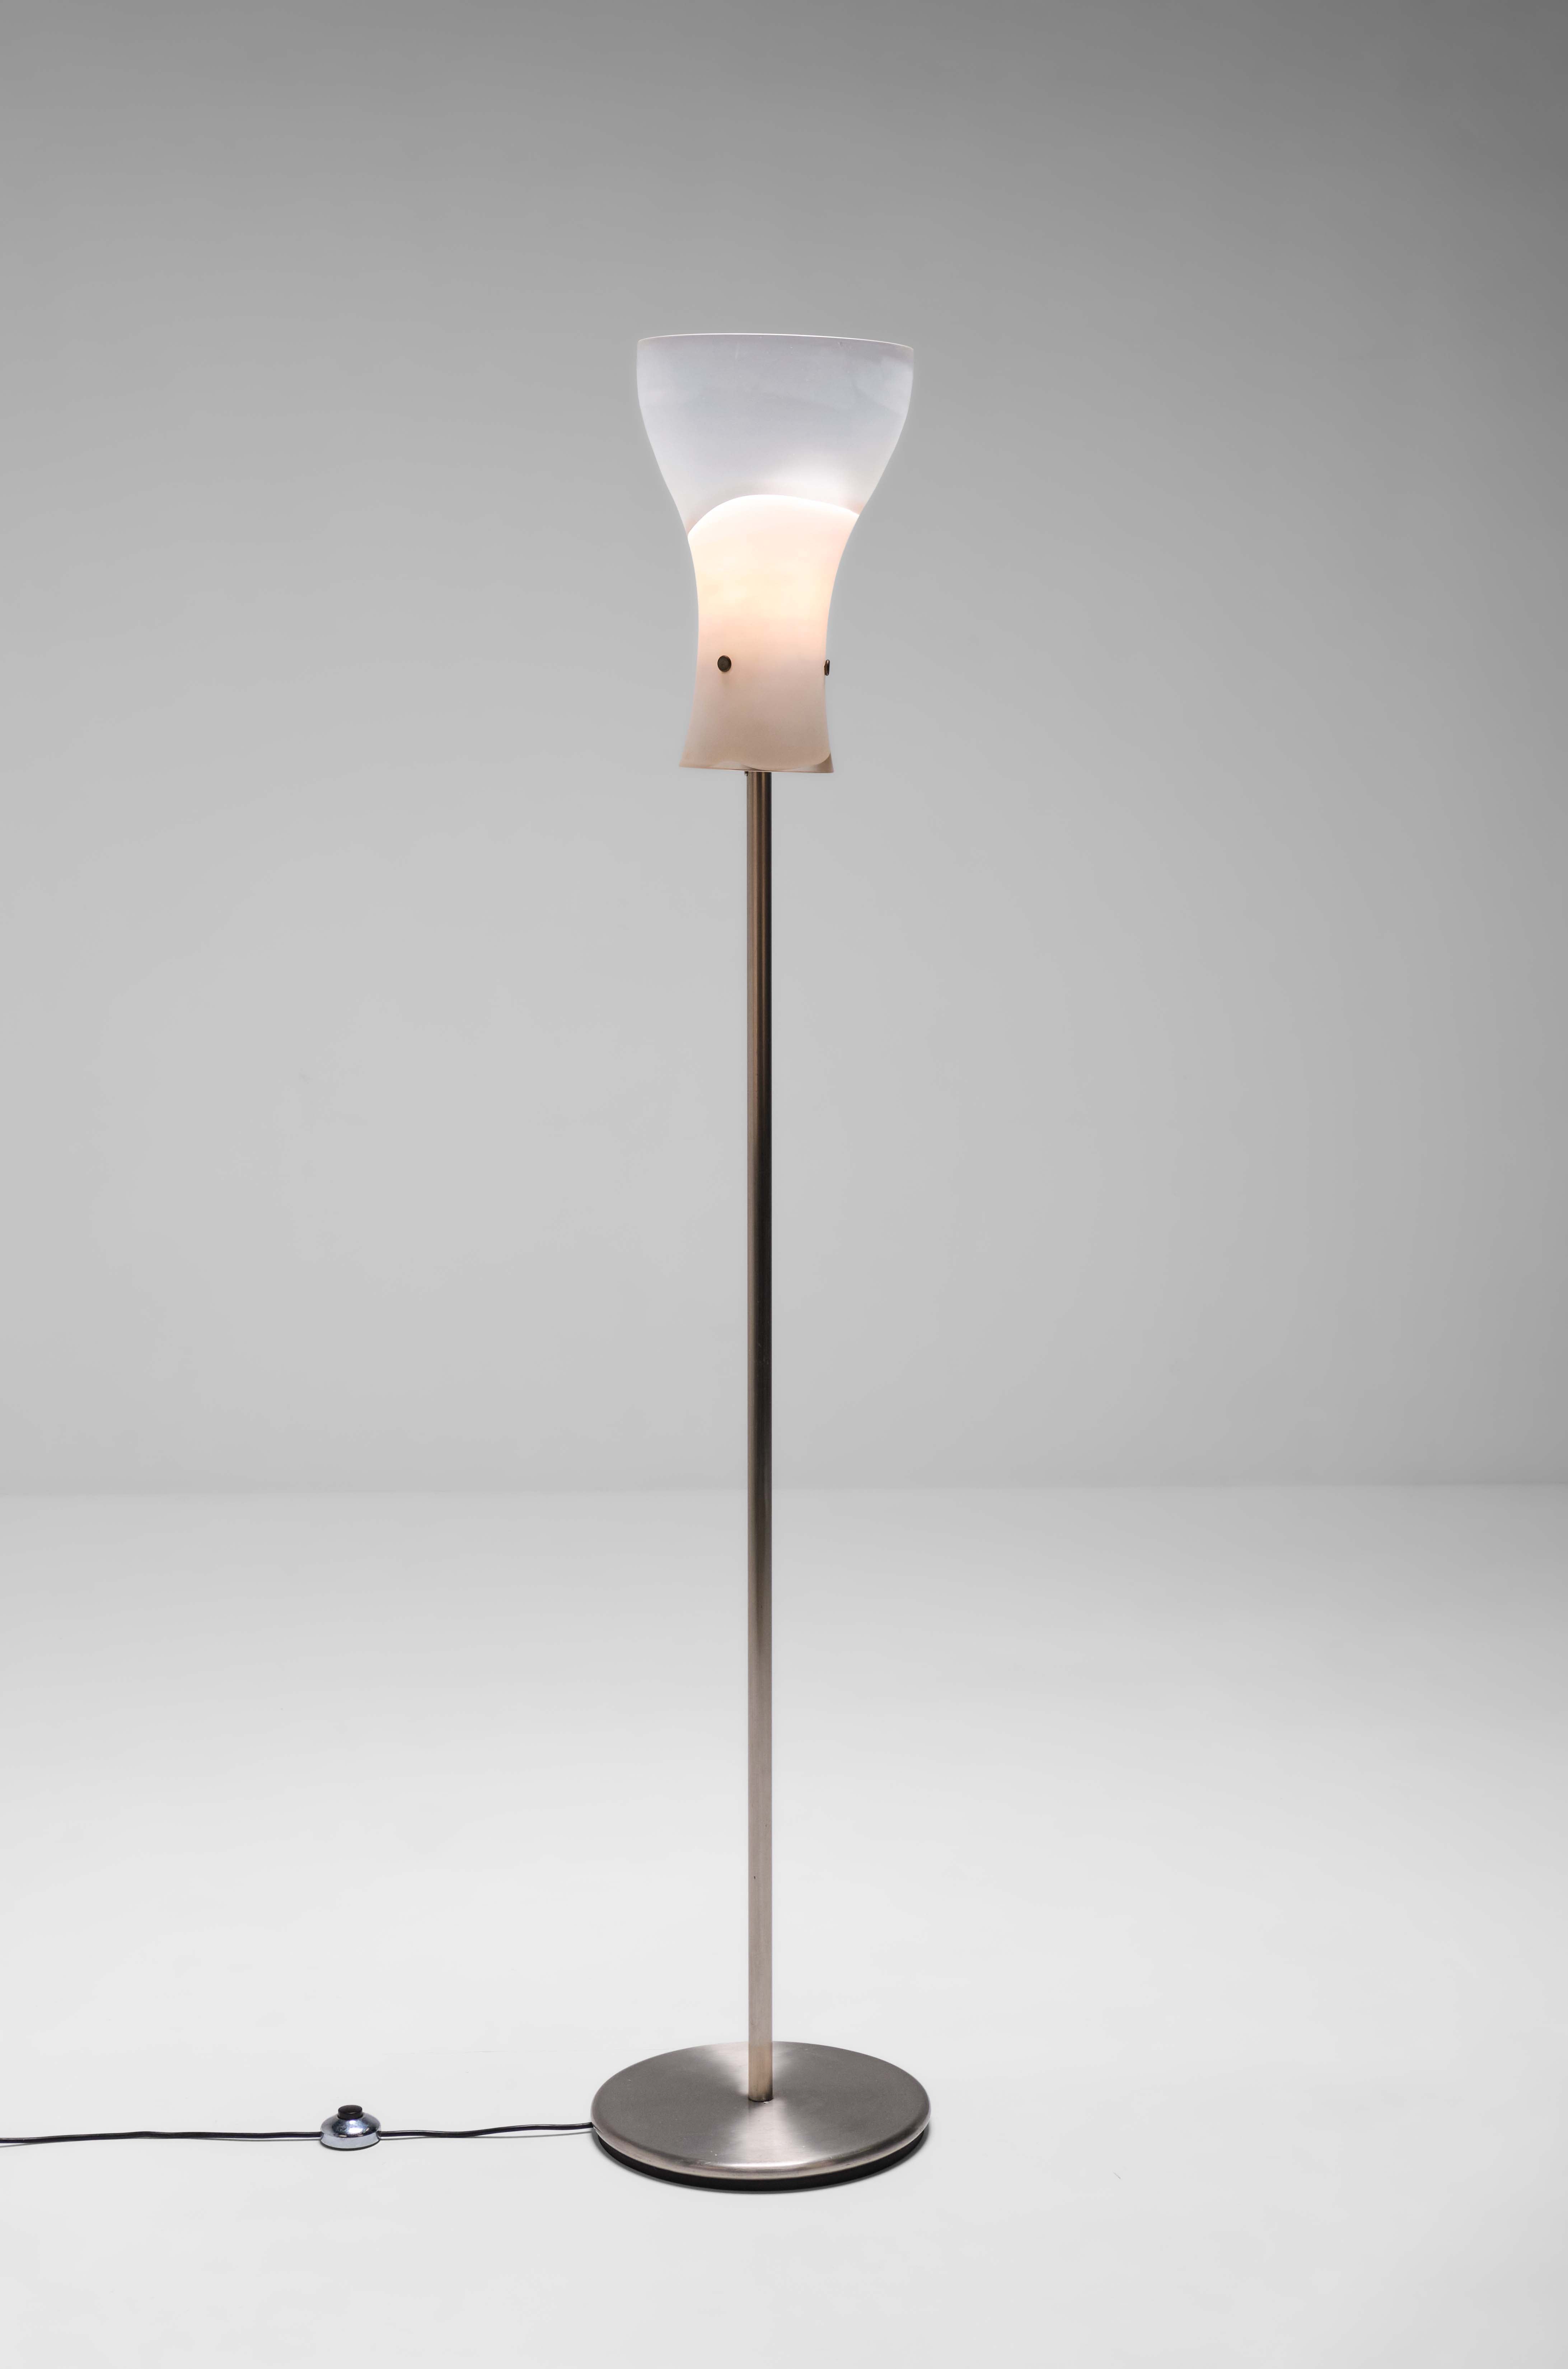 Ludovico Diaz De Santillana Floor lamp. Structure in chromed metal and diffuser in glass and milky satin glass. Produced by Venini, Italy, around 1970.
After graduating in architecture in Venice, he immediately devoted himself to university